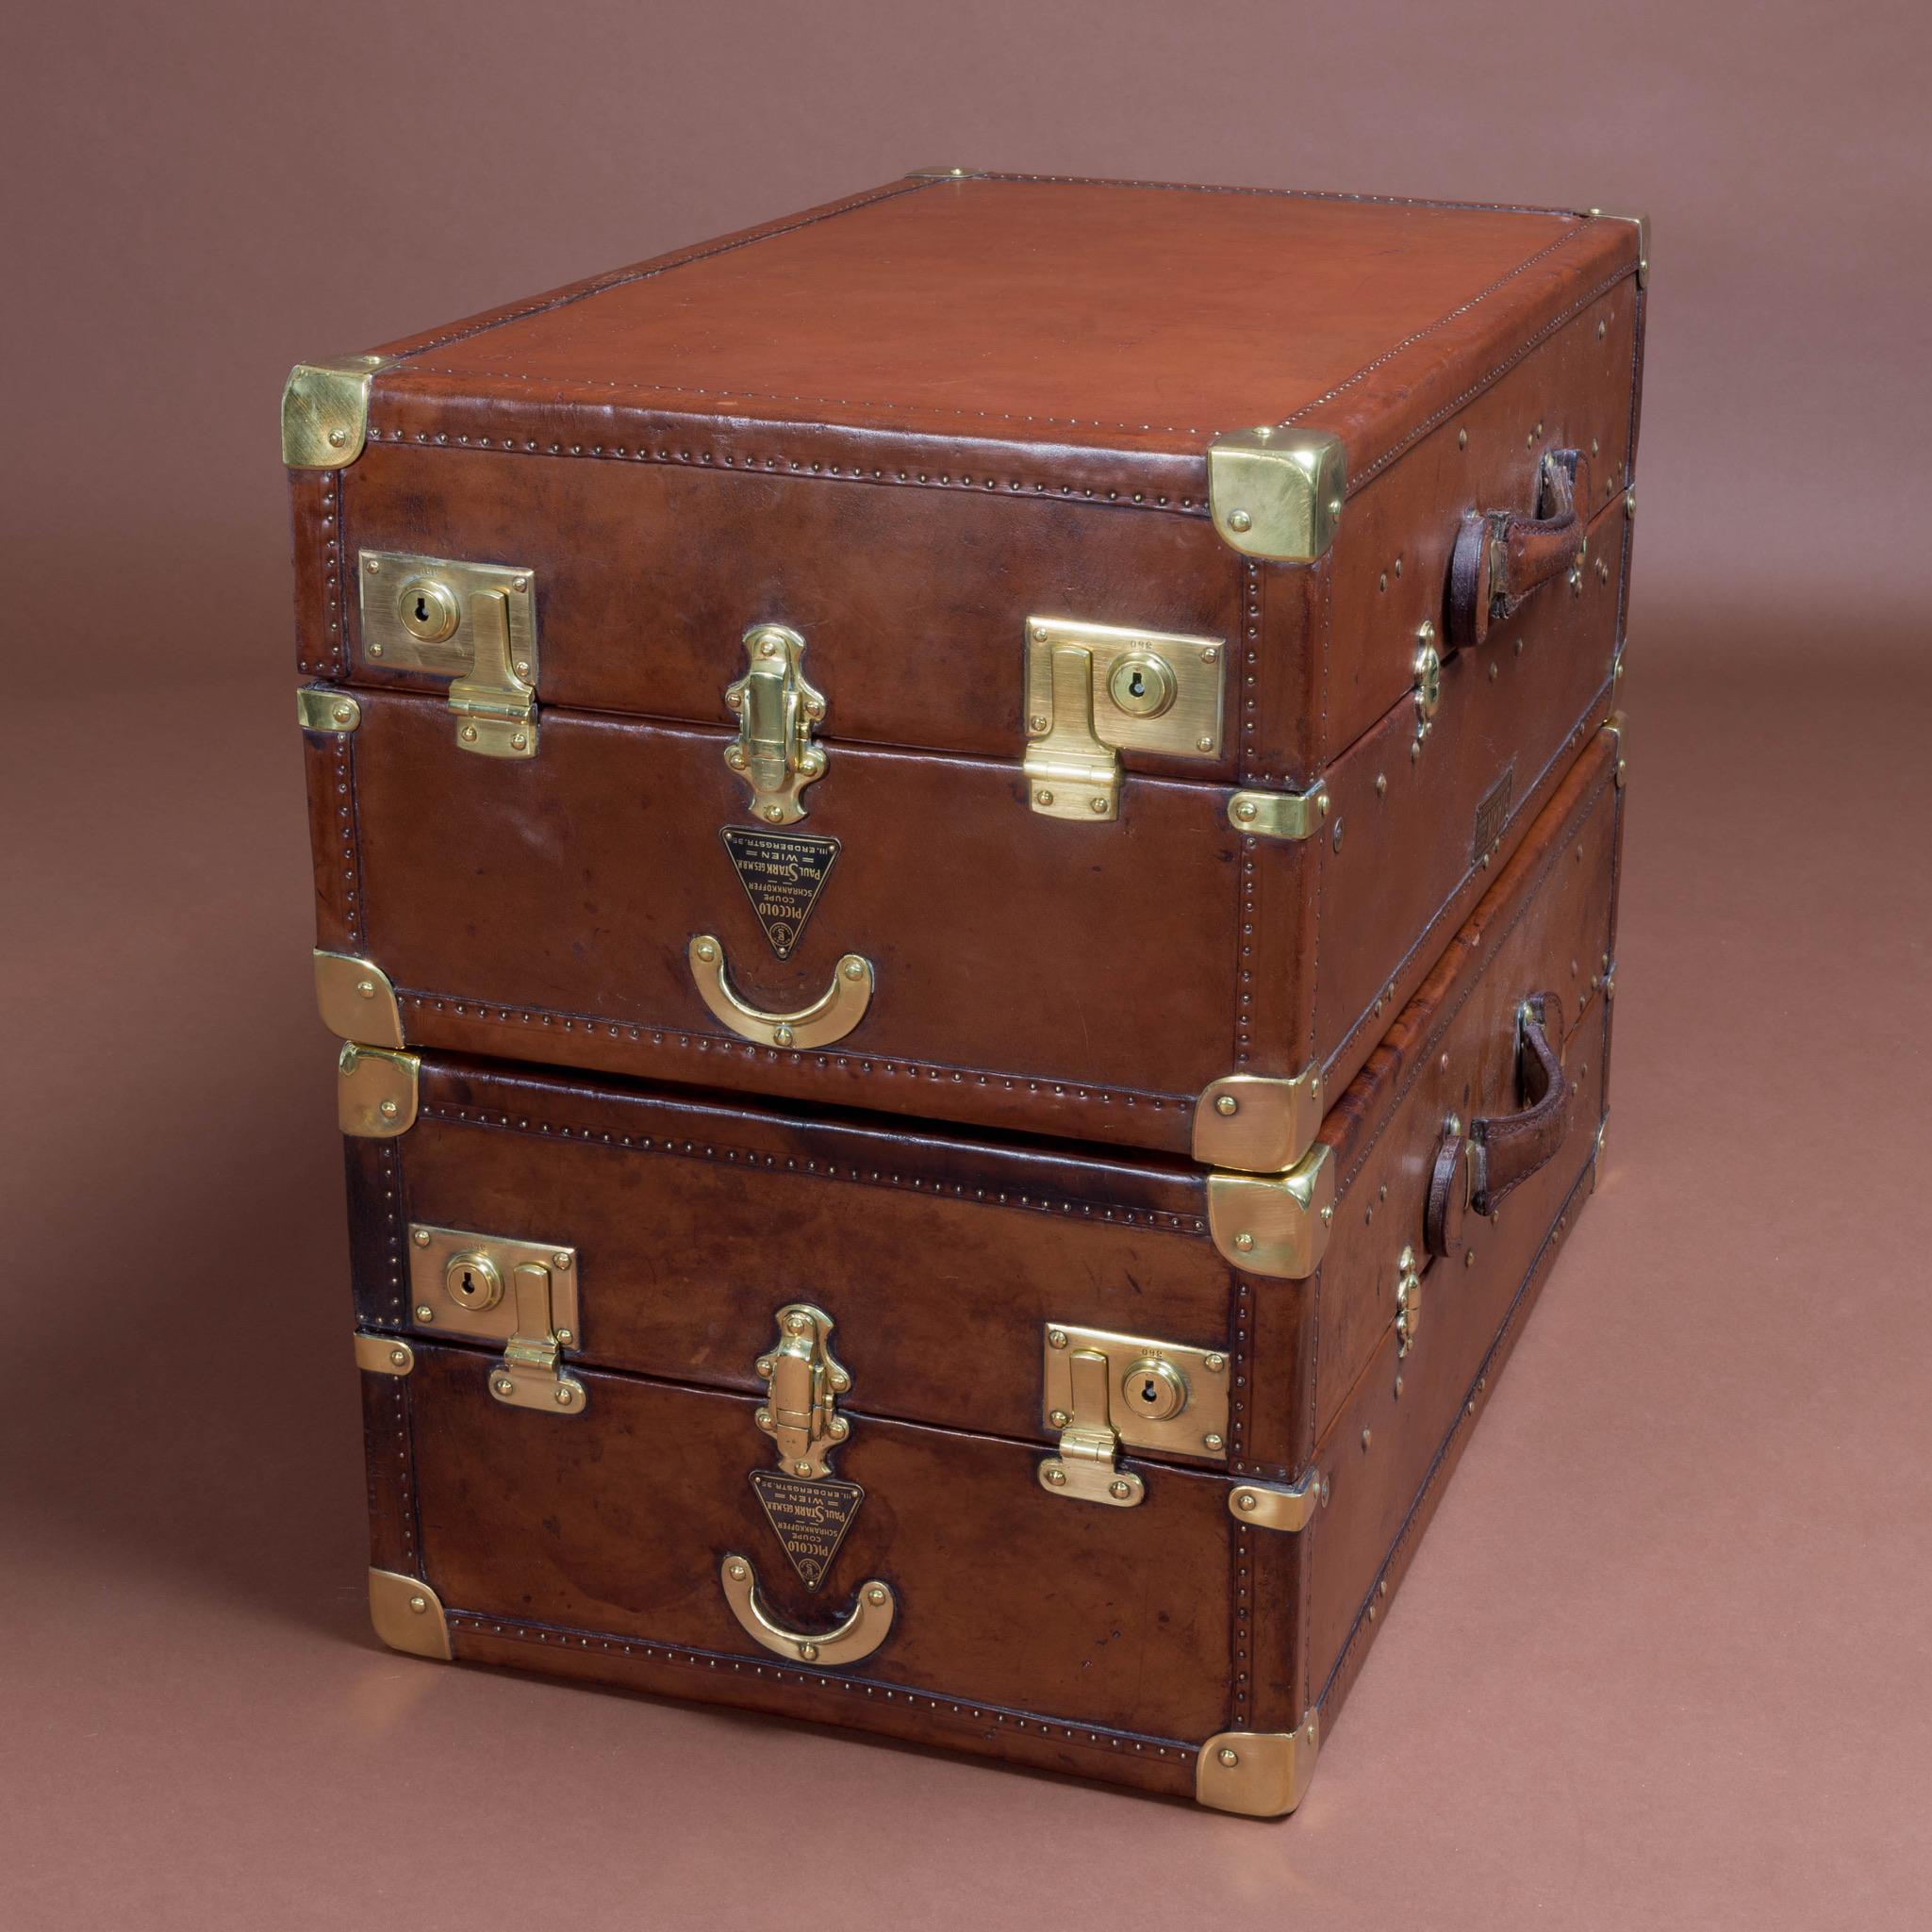 Austrian leather covered wardrobe trunks, by Vienna based luggage company Paul Stark, circa 1920. Fitted internally with hangers and rail. Heavy leather handles, brass rivets, locks, catches and corners as well as re-enforced edging. The brown